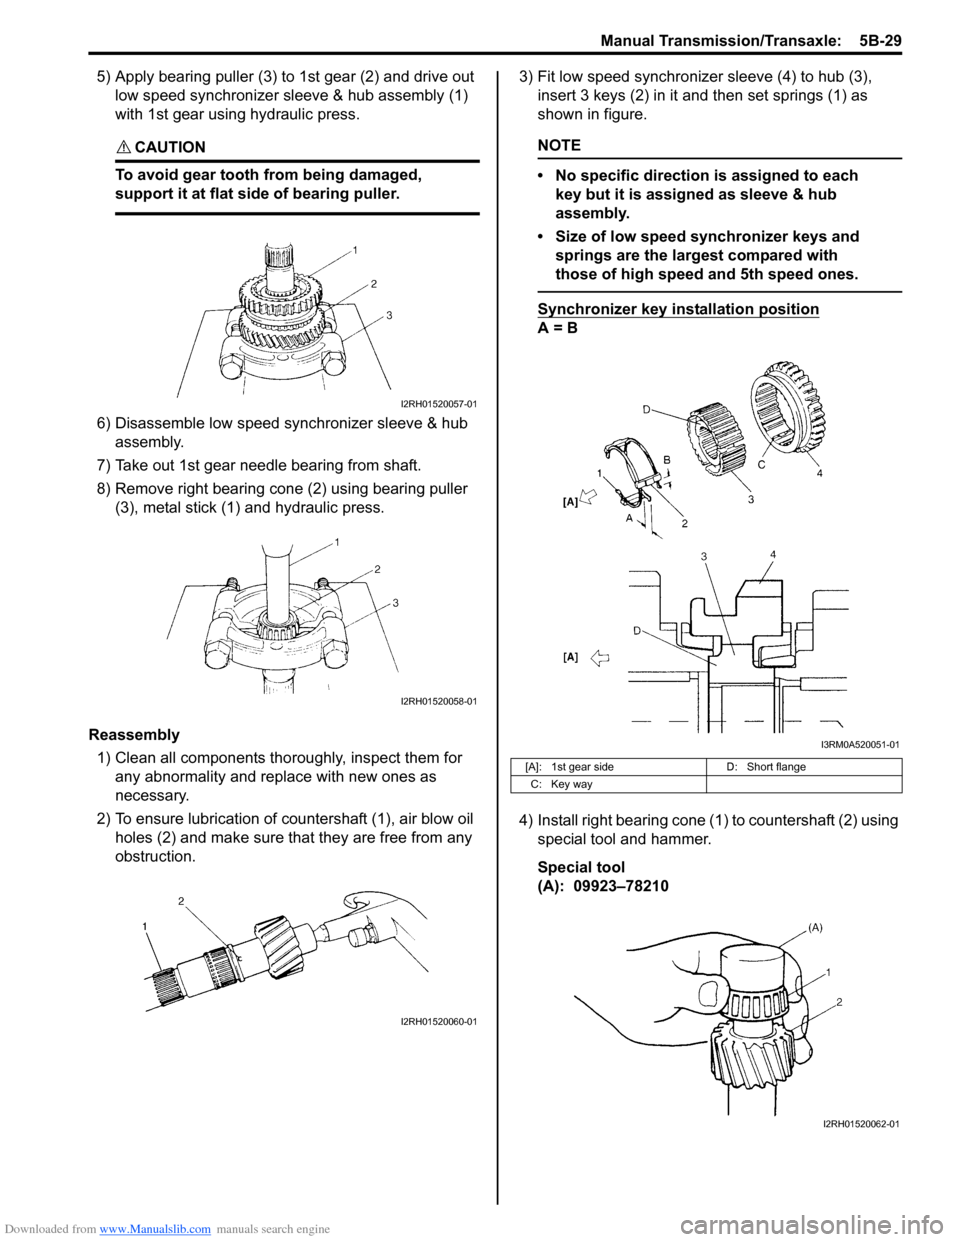 SUZUKI SWIFT 2006 2.G Service Workshop Manual Downloaded from www.Manualslib.com manuals search engine Manual Transmission/Transaxle:  5B-29
5) Apply bearing puller (3) to 1st gear (2) and drive out low speed synchronizer sleeve & hub assembly (1